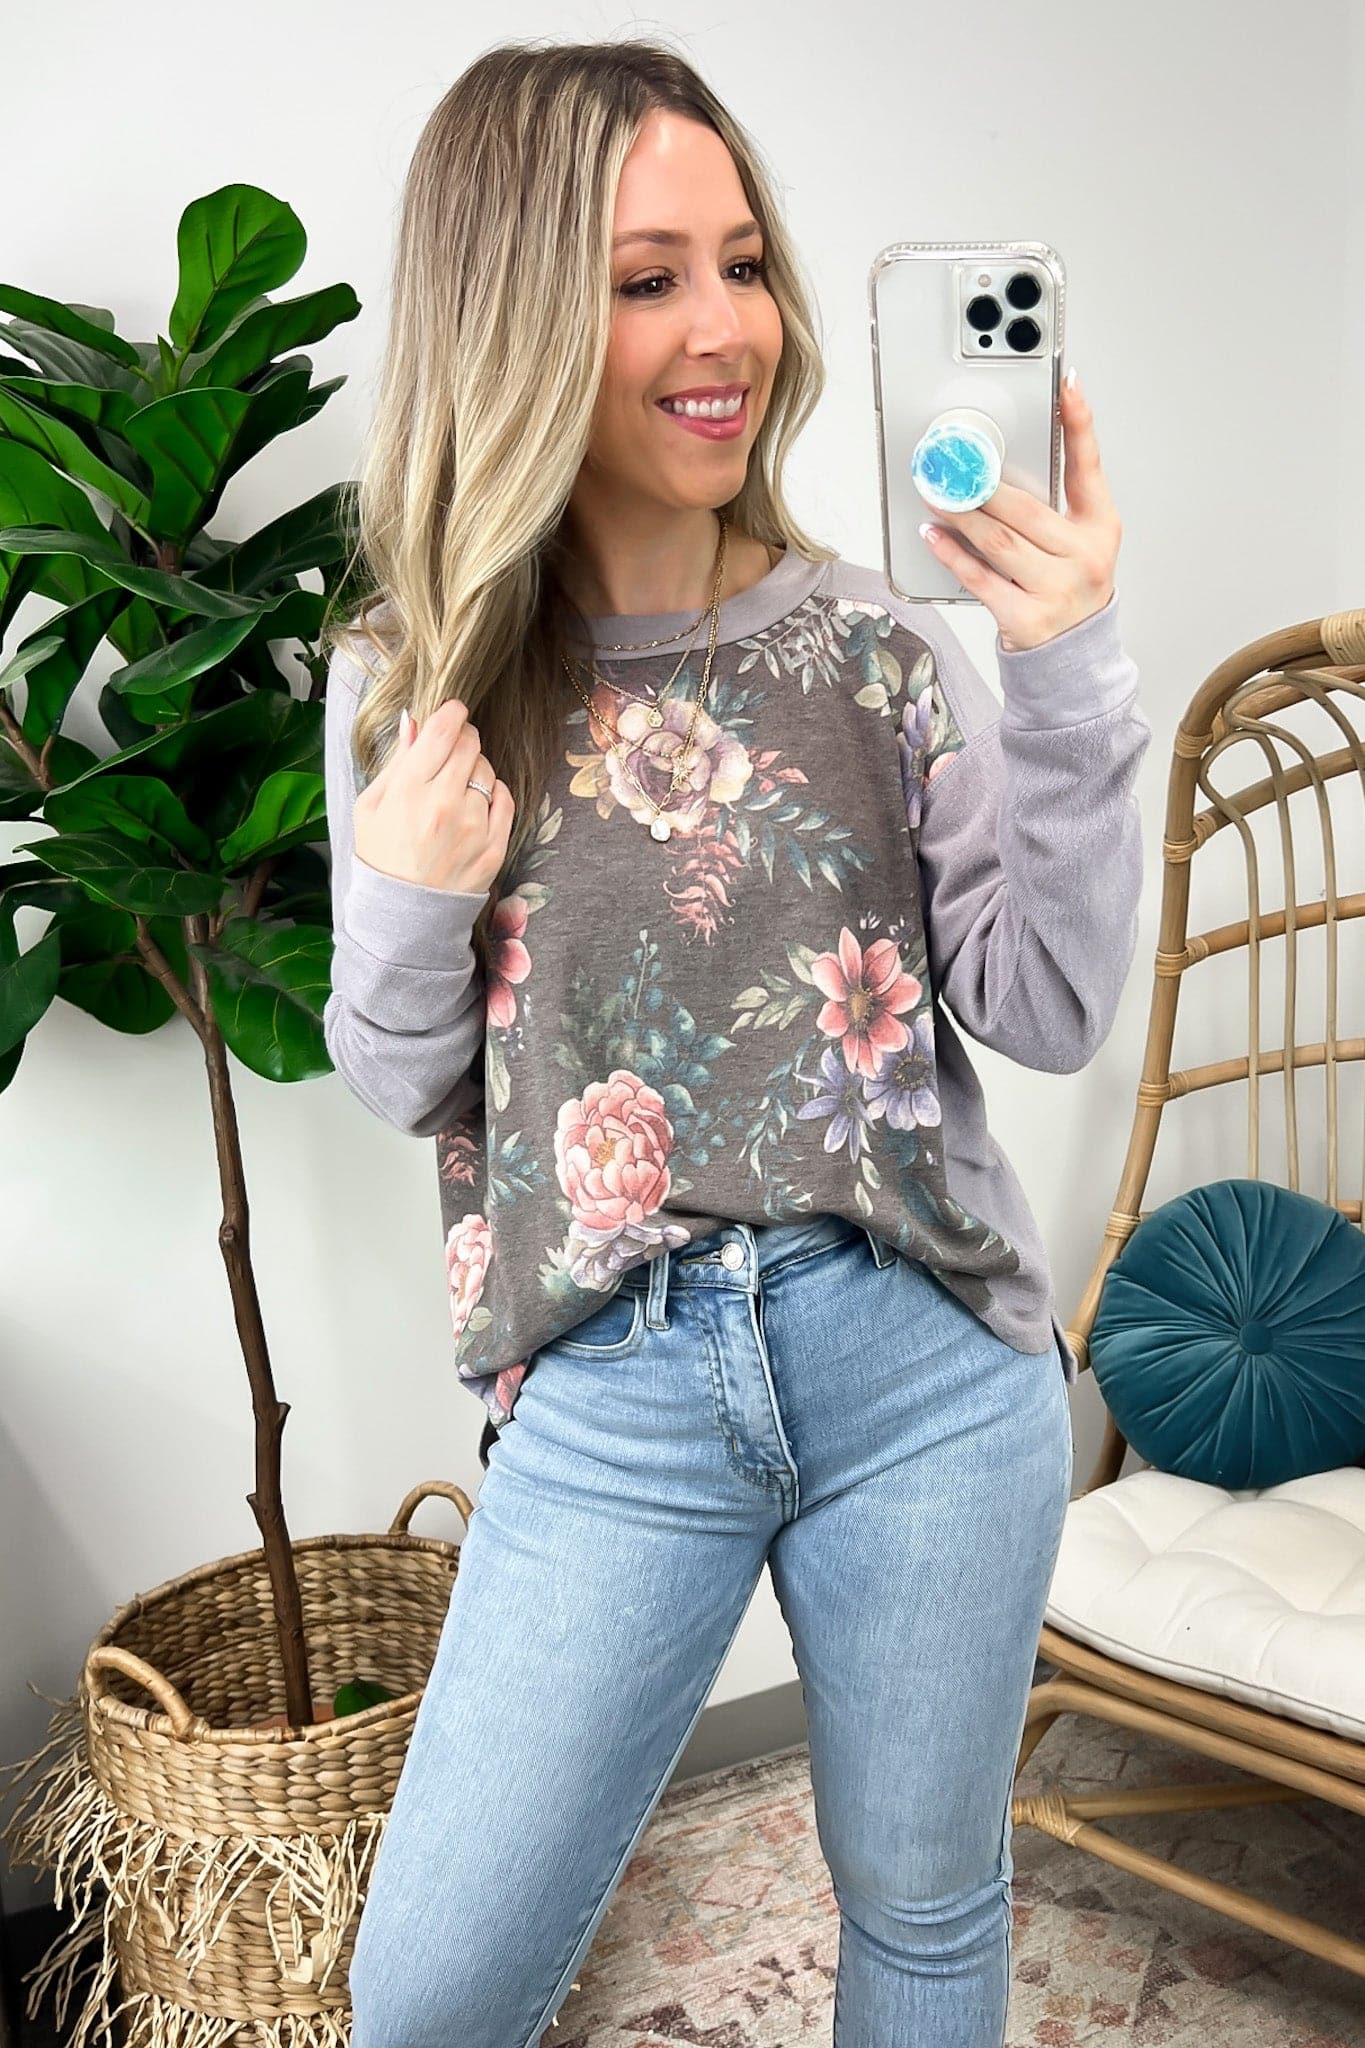  Anisah Color Block Floral Print Top - FINAL SALE - Madison and Mallory